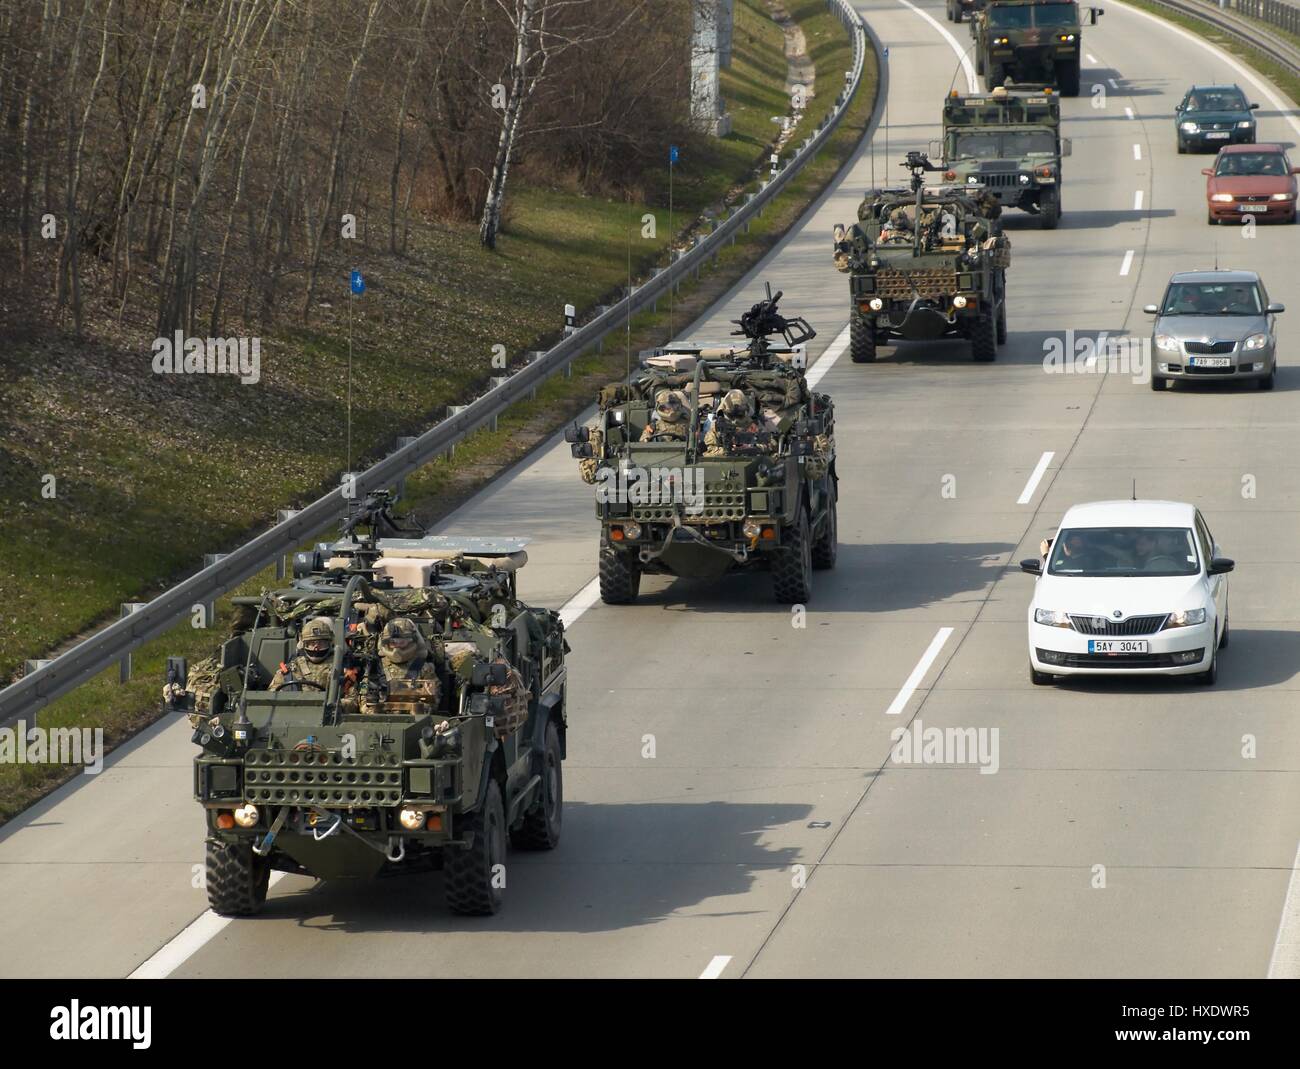 https://c8.alamy.com/comp/HXDWR5/us-british-military-convoy-soldiers-military-technology-HXDWR5.jpg